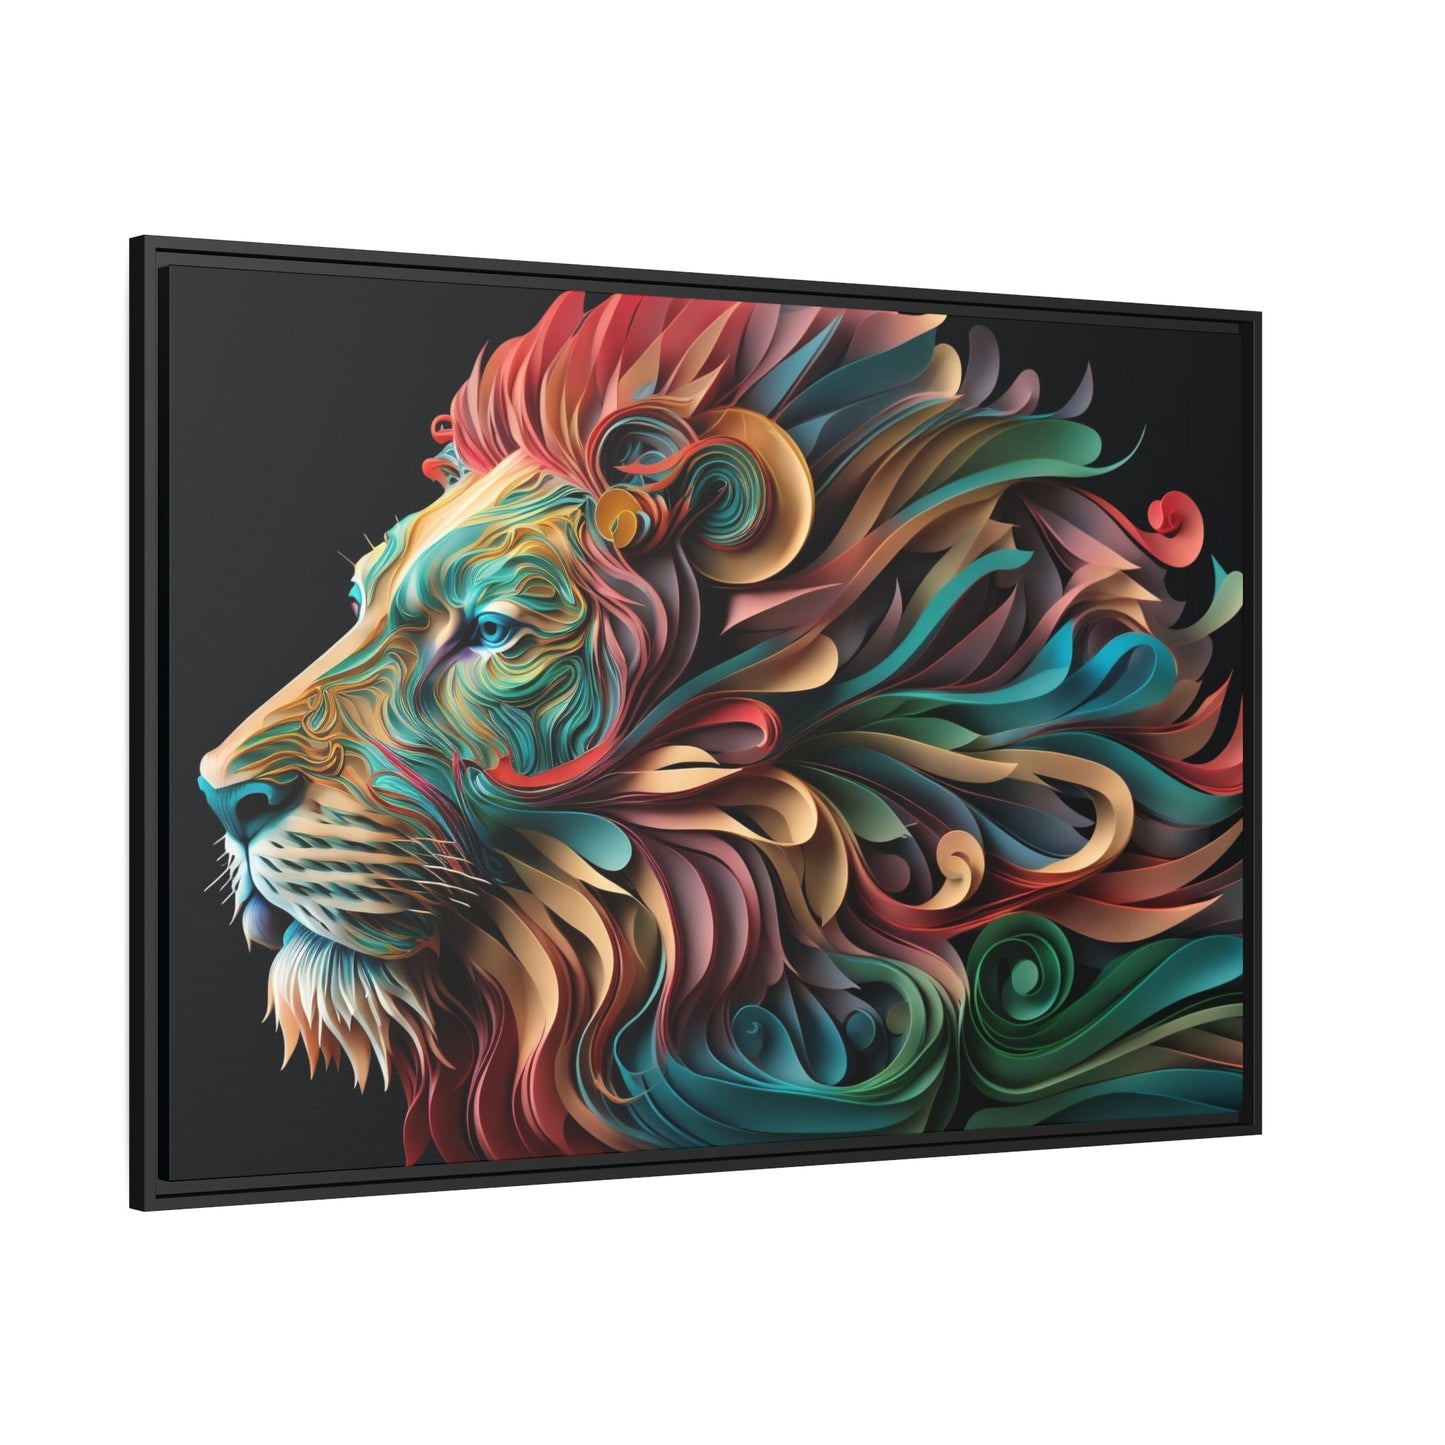 Lion's Pride: Natural Canvas Wall Art of the Regal African Mammal